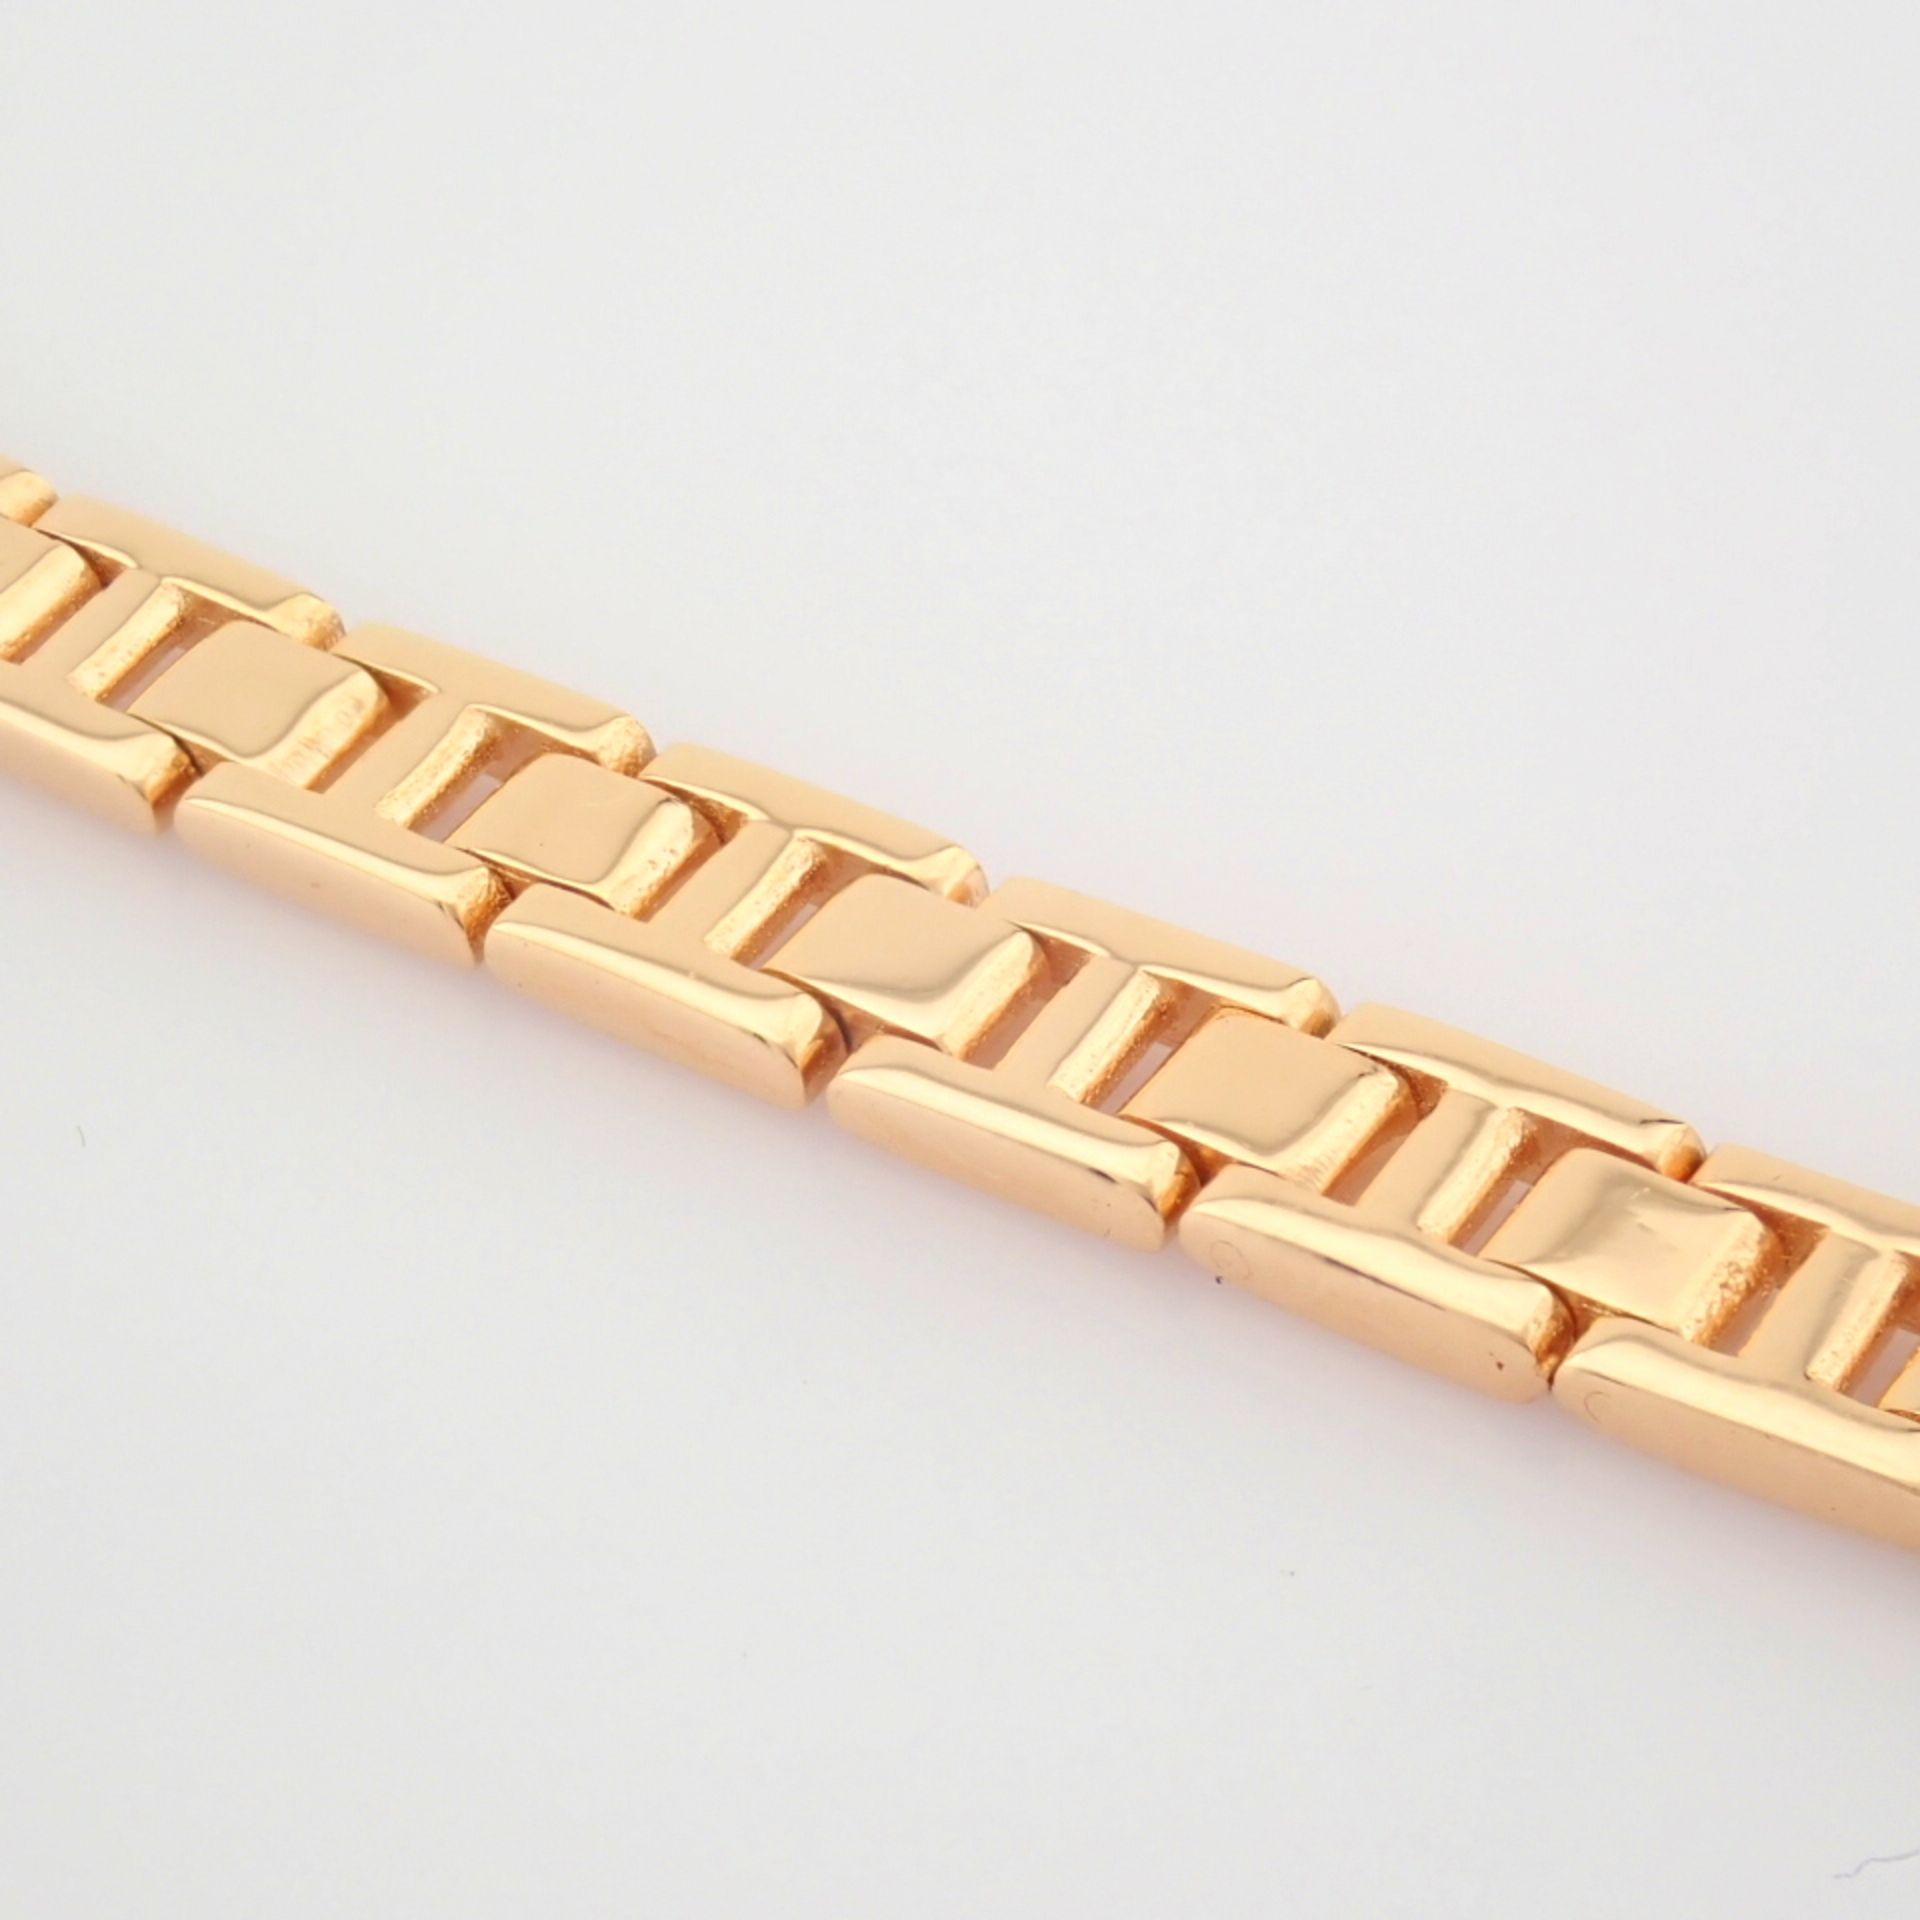 Certificated 14K White and Rose Gold Diamond & Baguette Diamond Bracelet (Total 0.52 ct Stone) - Image 8 of 10